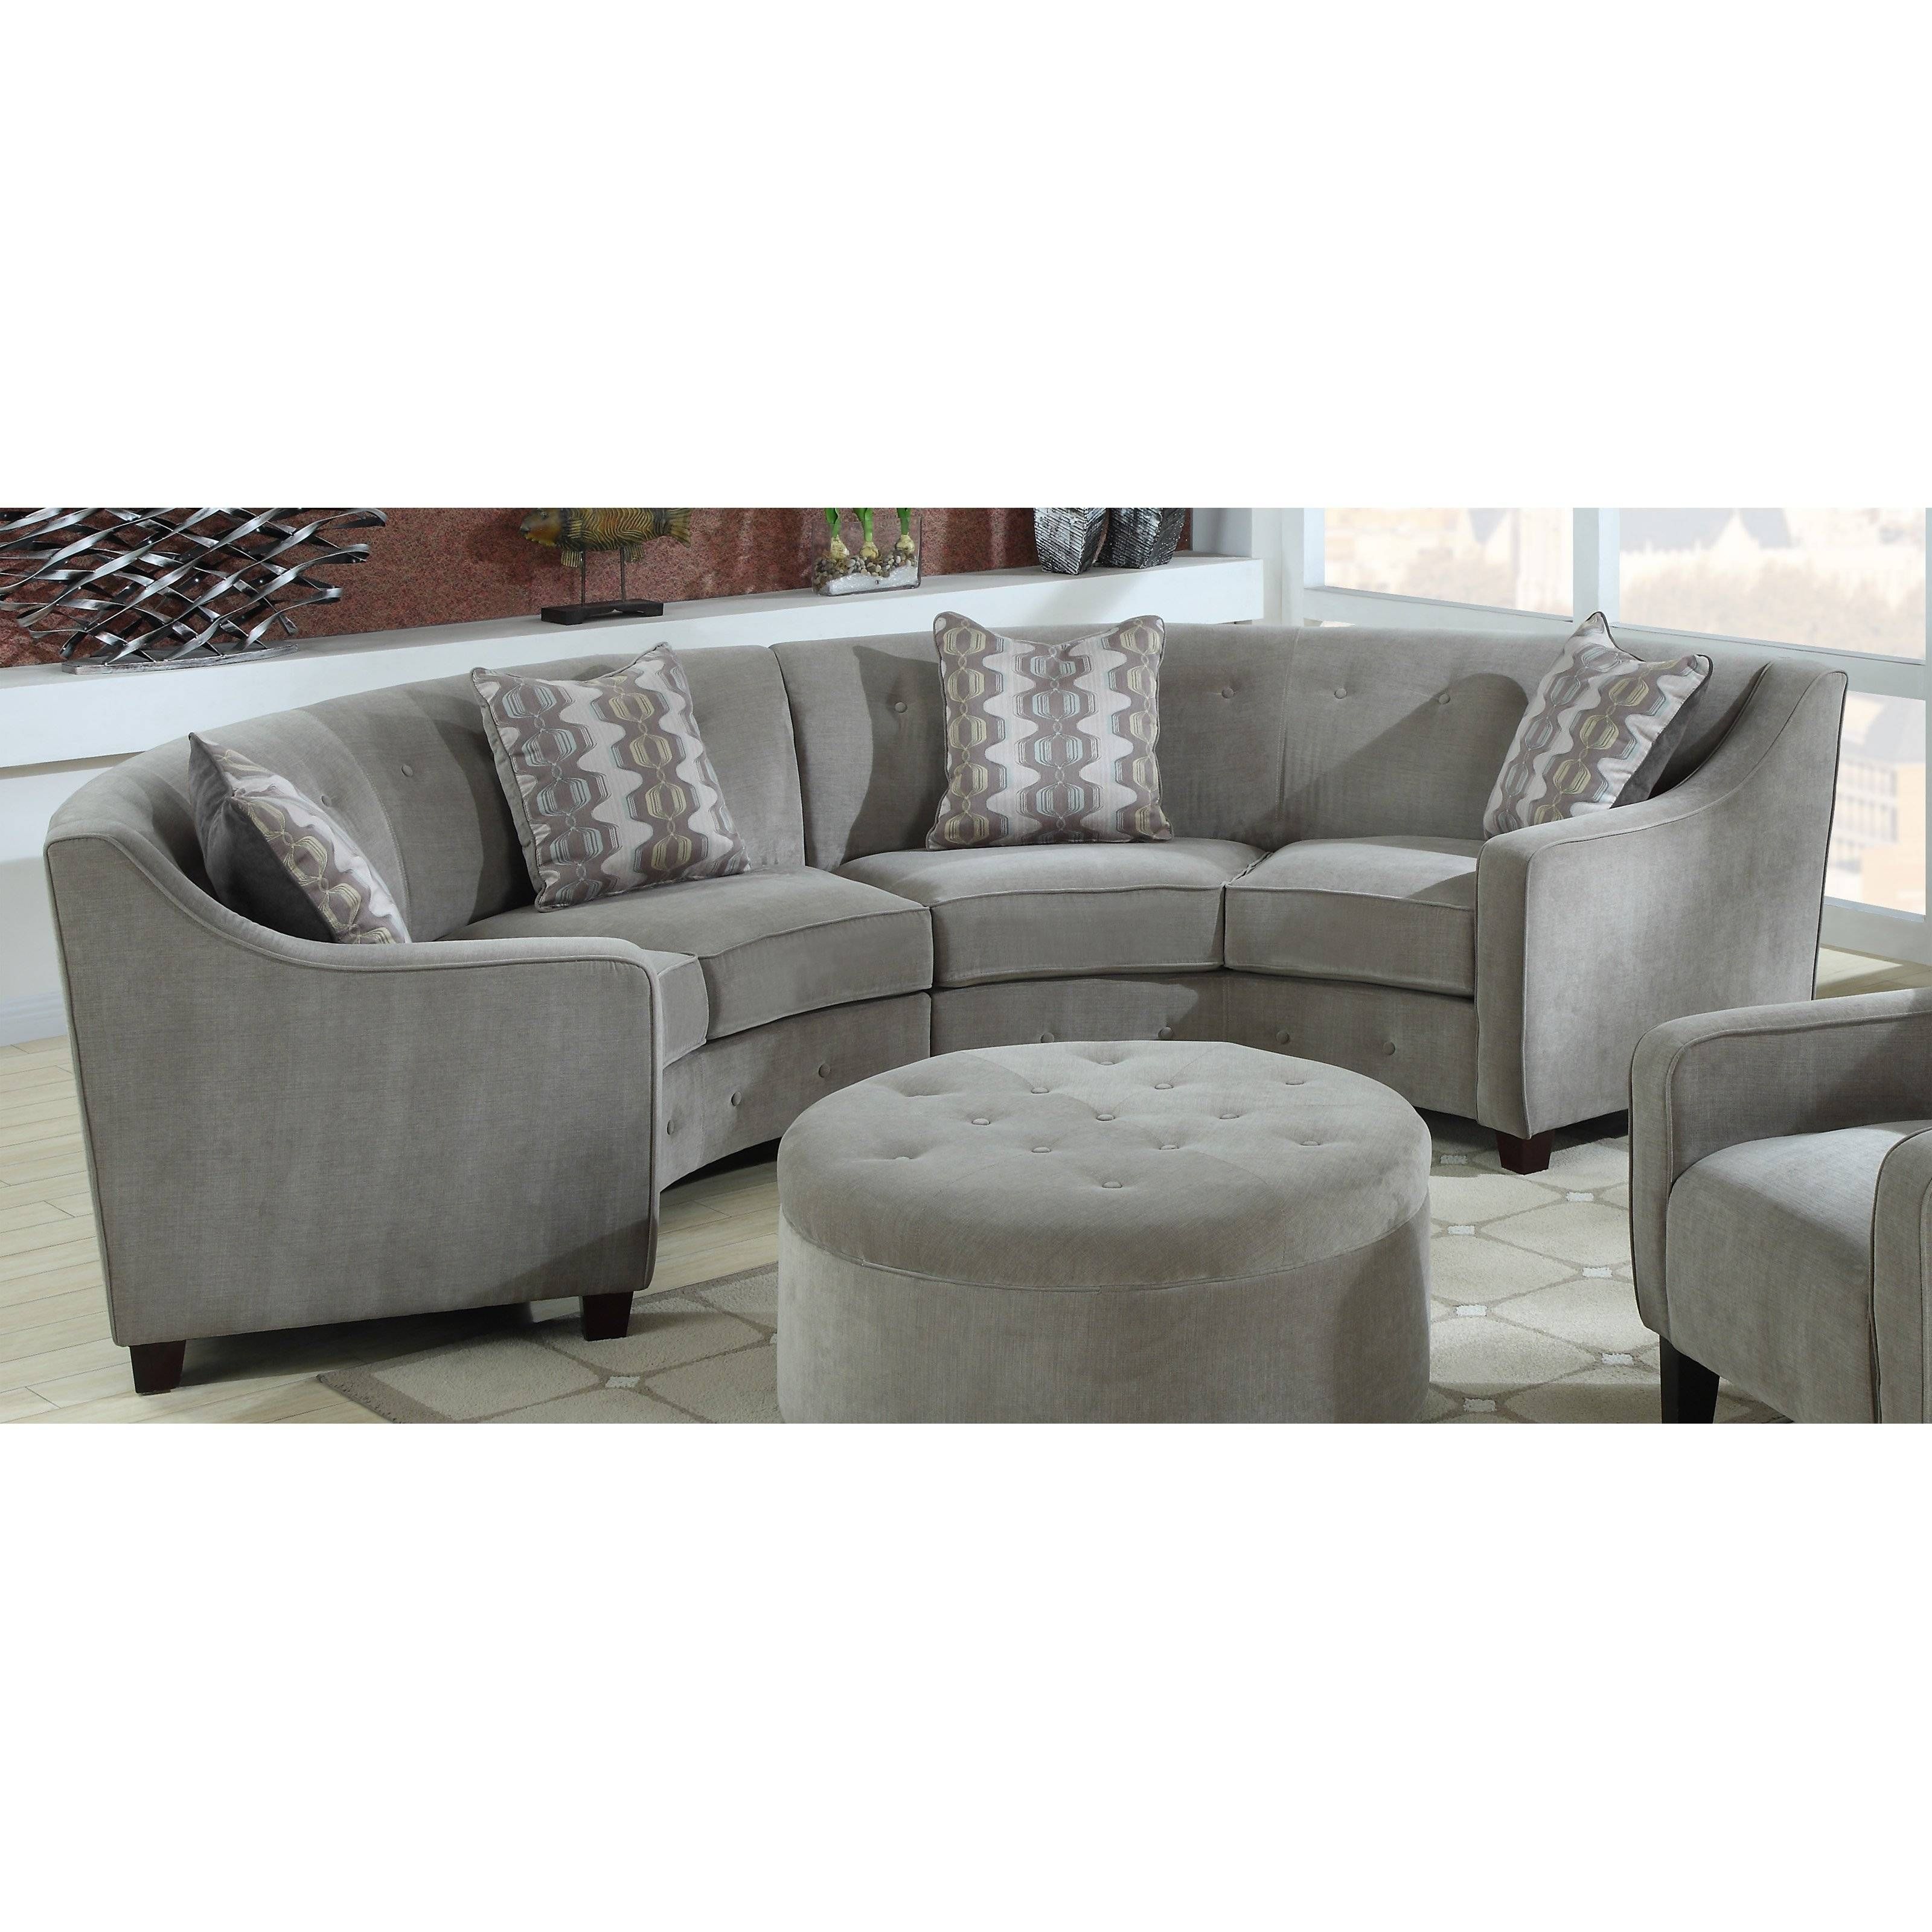 Featured Photo of 15 Inspirations Half Moon Sectional Sofas